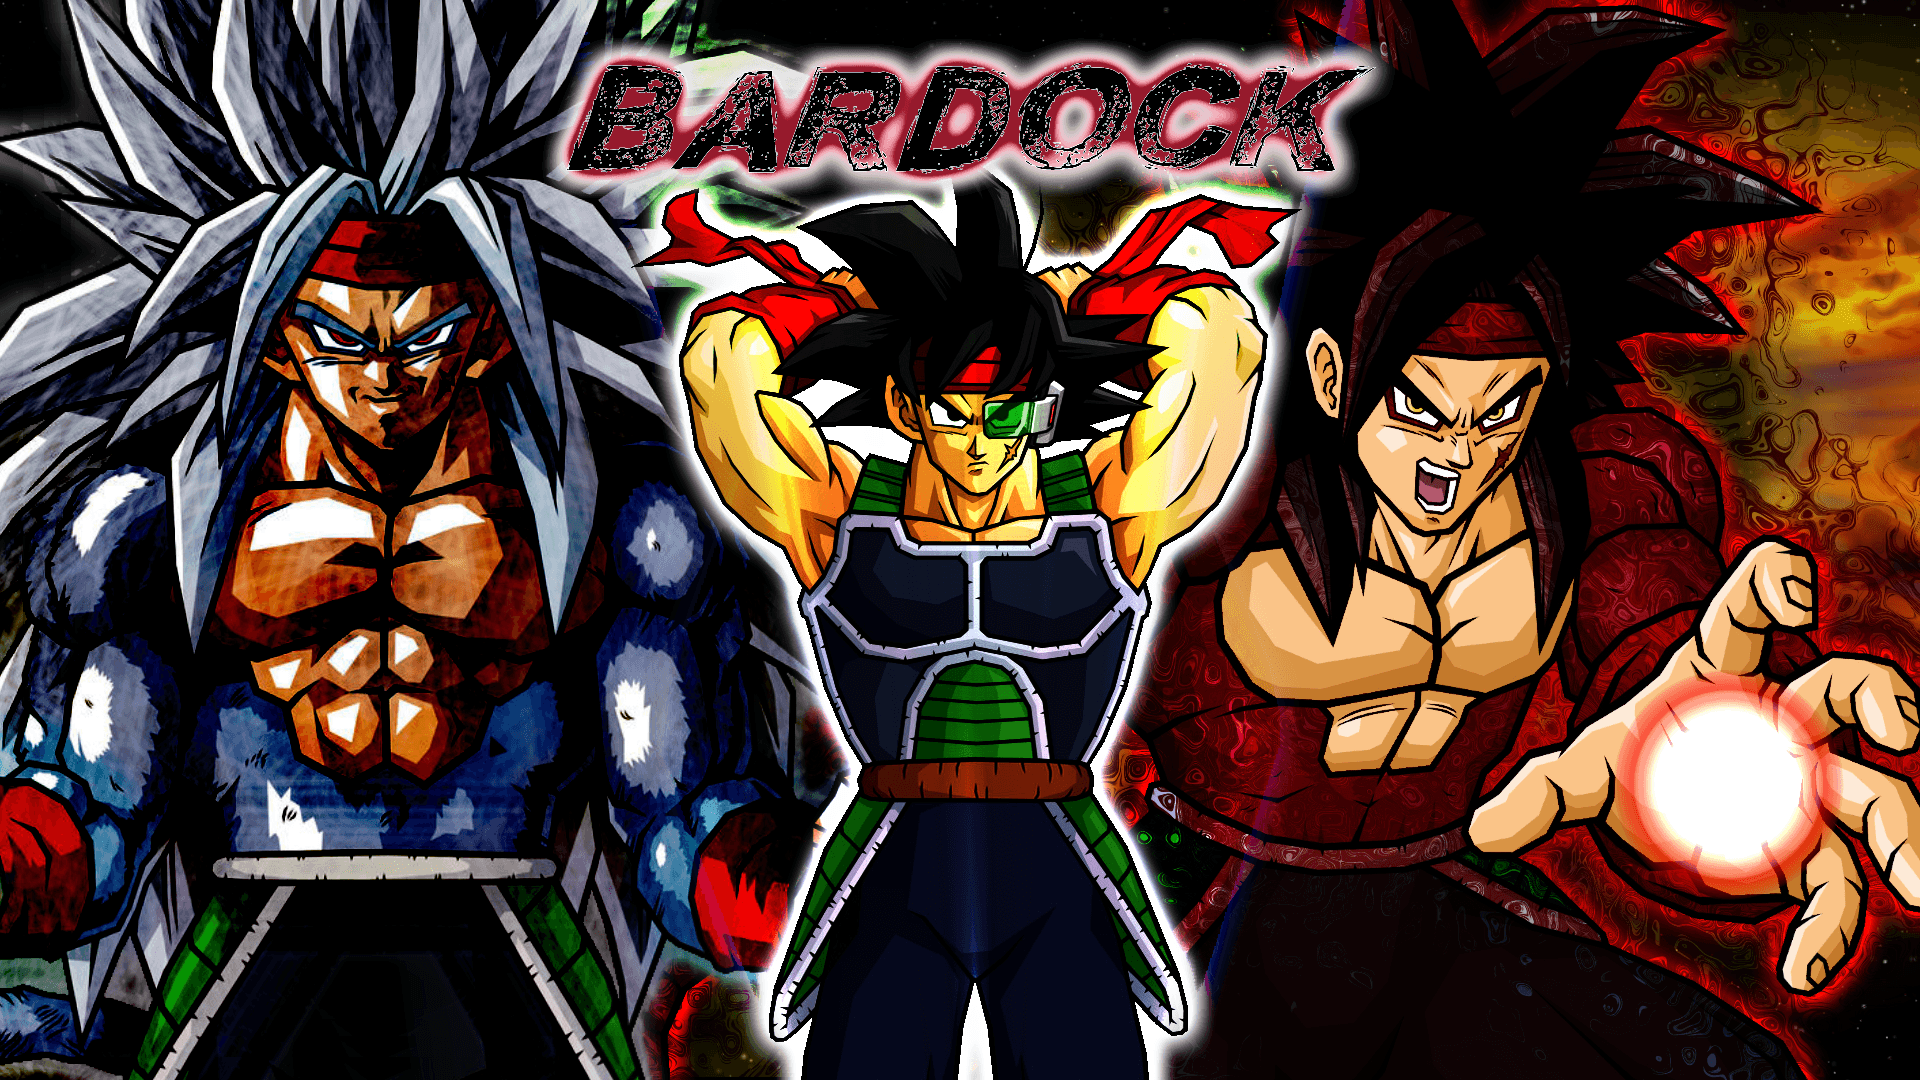 Wallpaper.wiki Cool Bardock Background PIC WPC003000